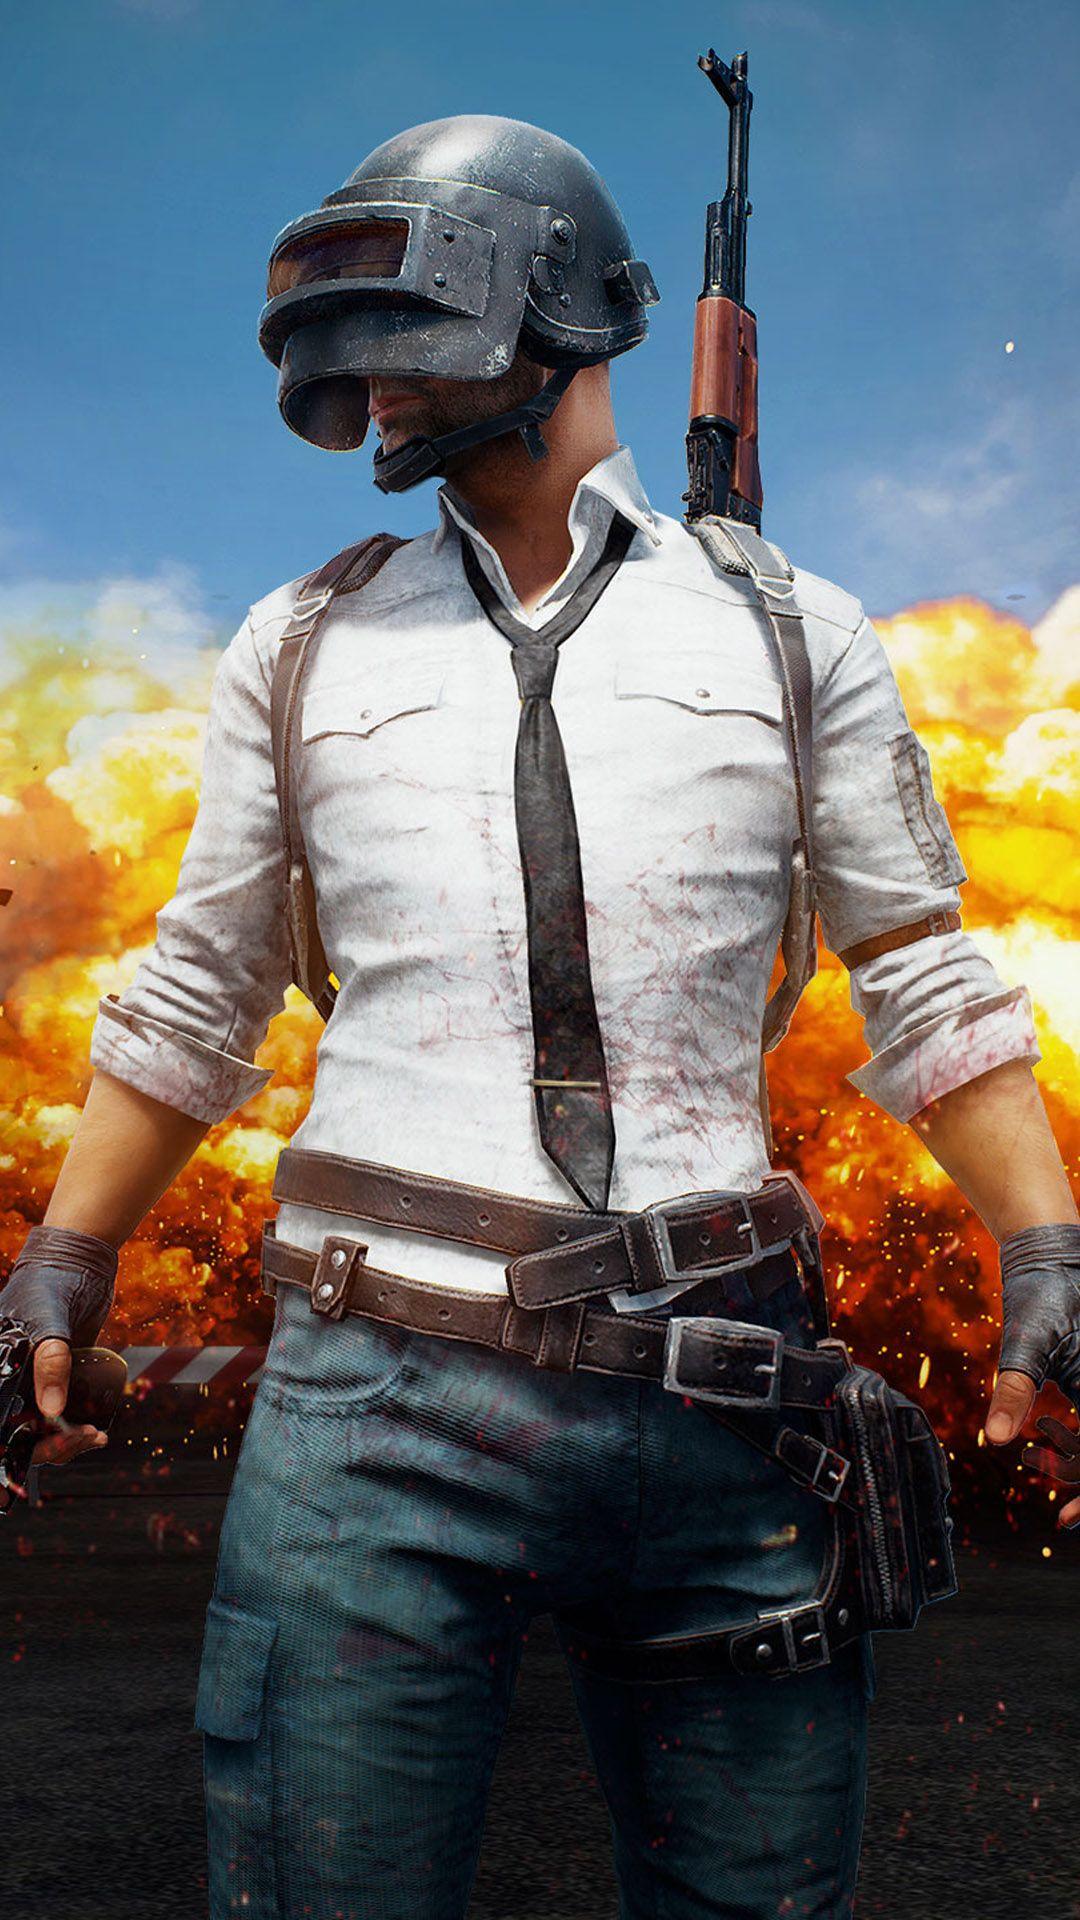 Download PUBG wallpapers for iPhone and Android smartphones